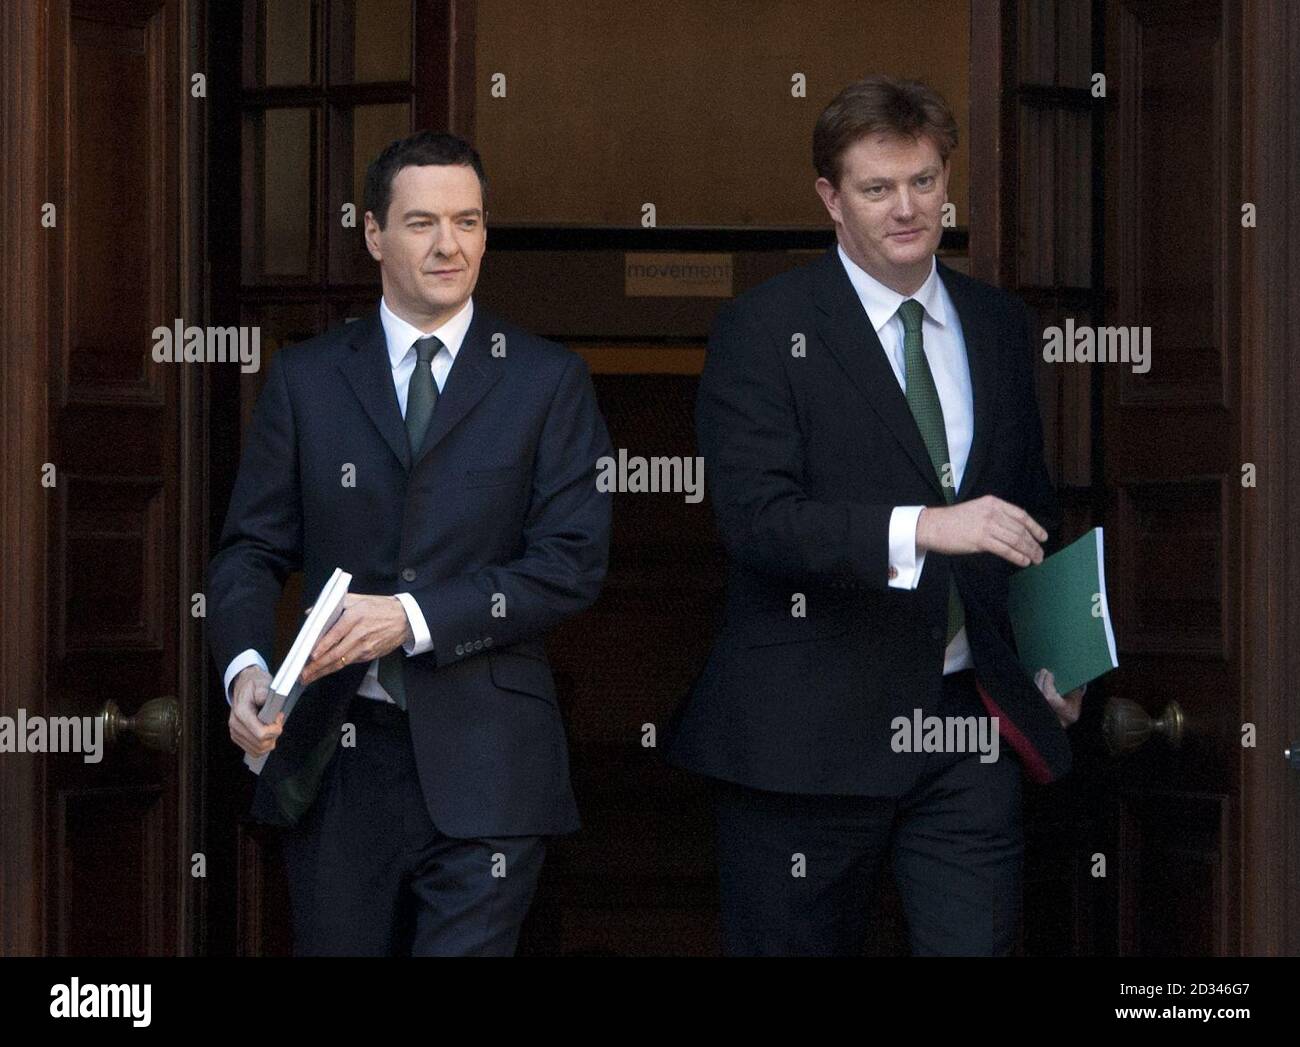 Chancellor of the Exchequer George Osborne (left) and Treasury Chief Secretary Danny Alexander leave the Treasury in London for the House of Commons, where Osborne will deliver his Autumn Statement. Stock Photo